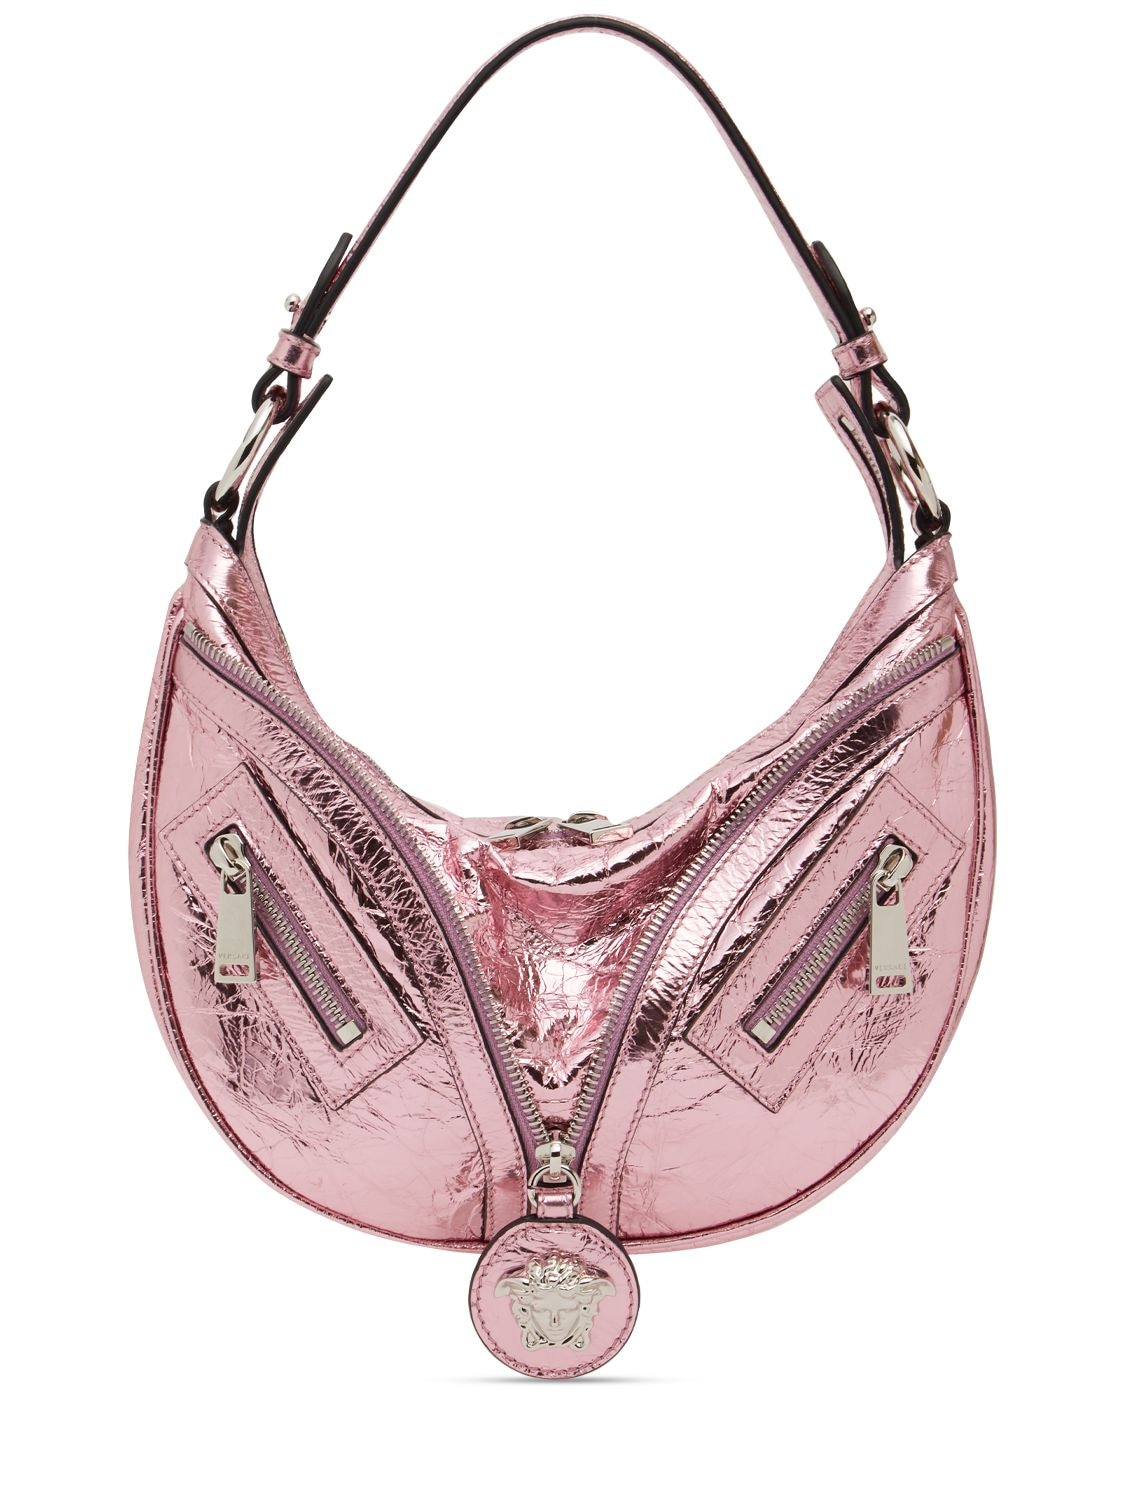 Versace Small Repeat Metallic Leather Hobo Bag In Baby Pink